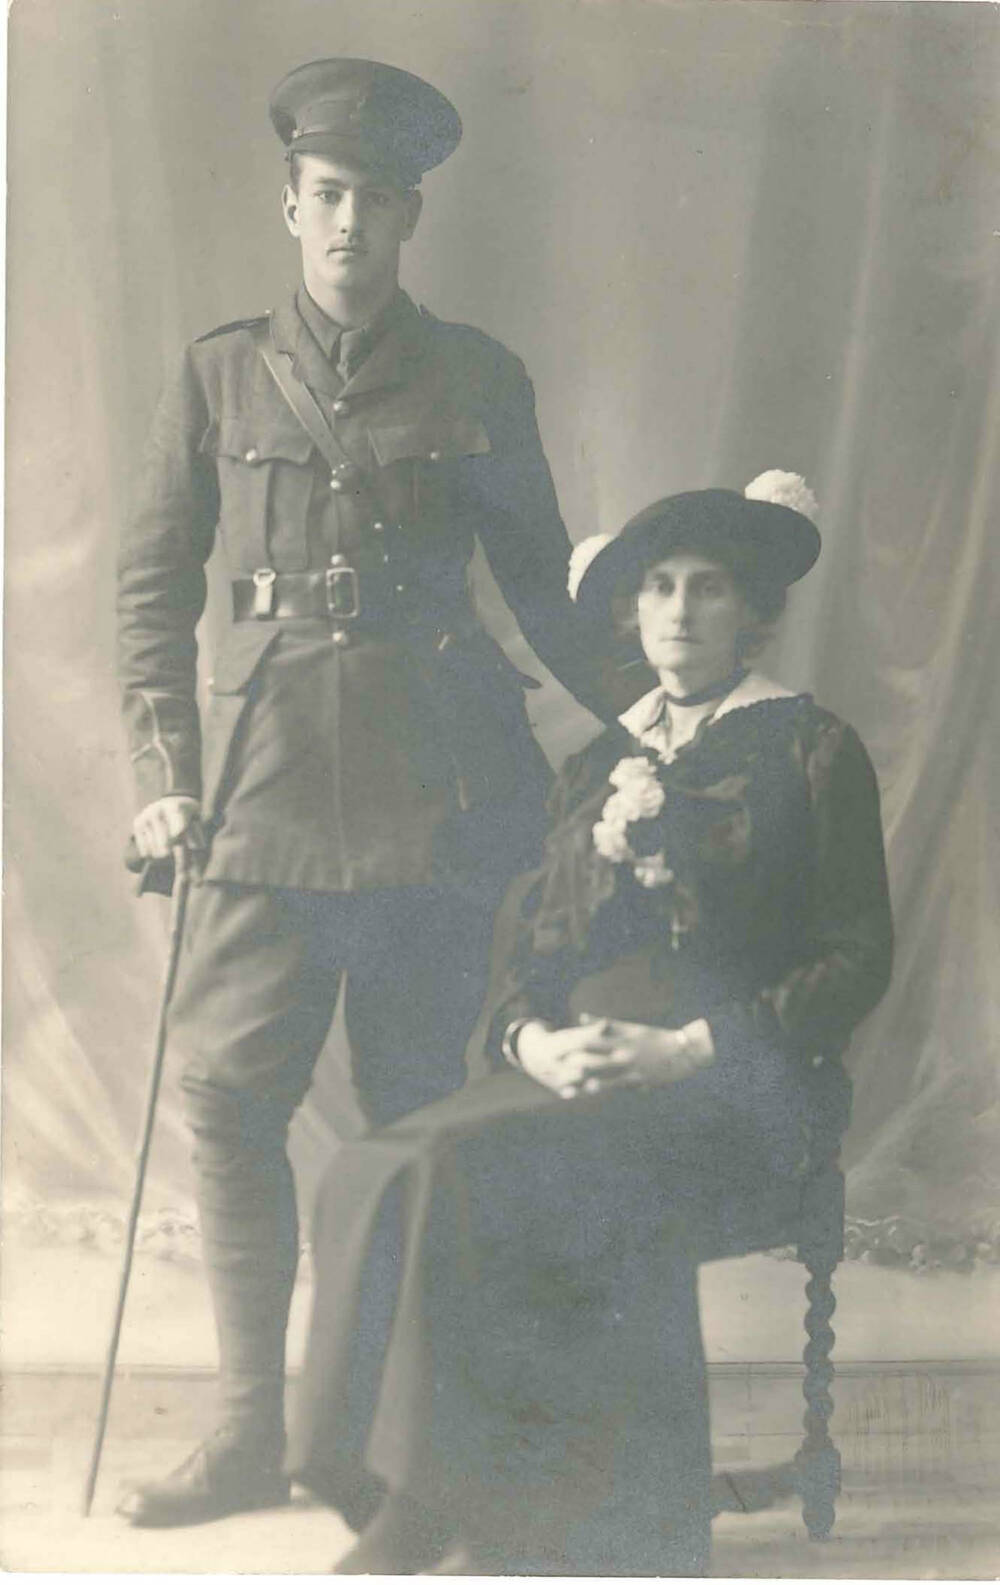 Photograph of Harry Jacob in his BEF uniform with his mother Violet, possibly 1914 or 1915